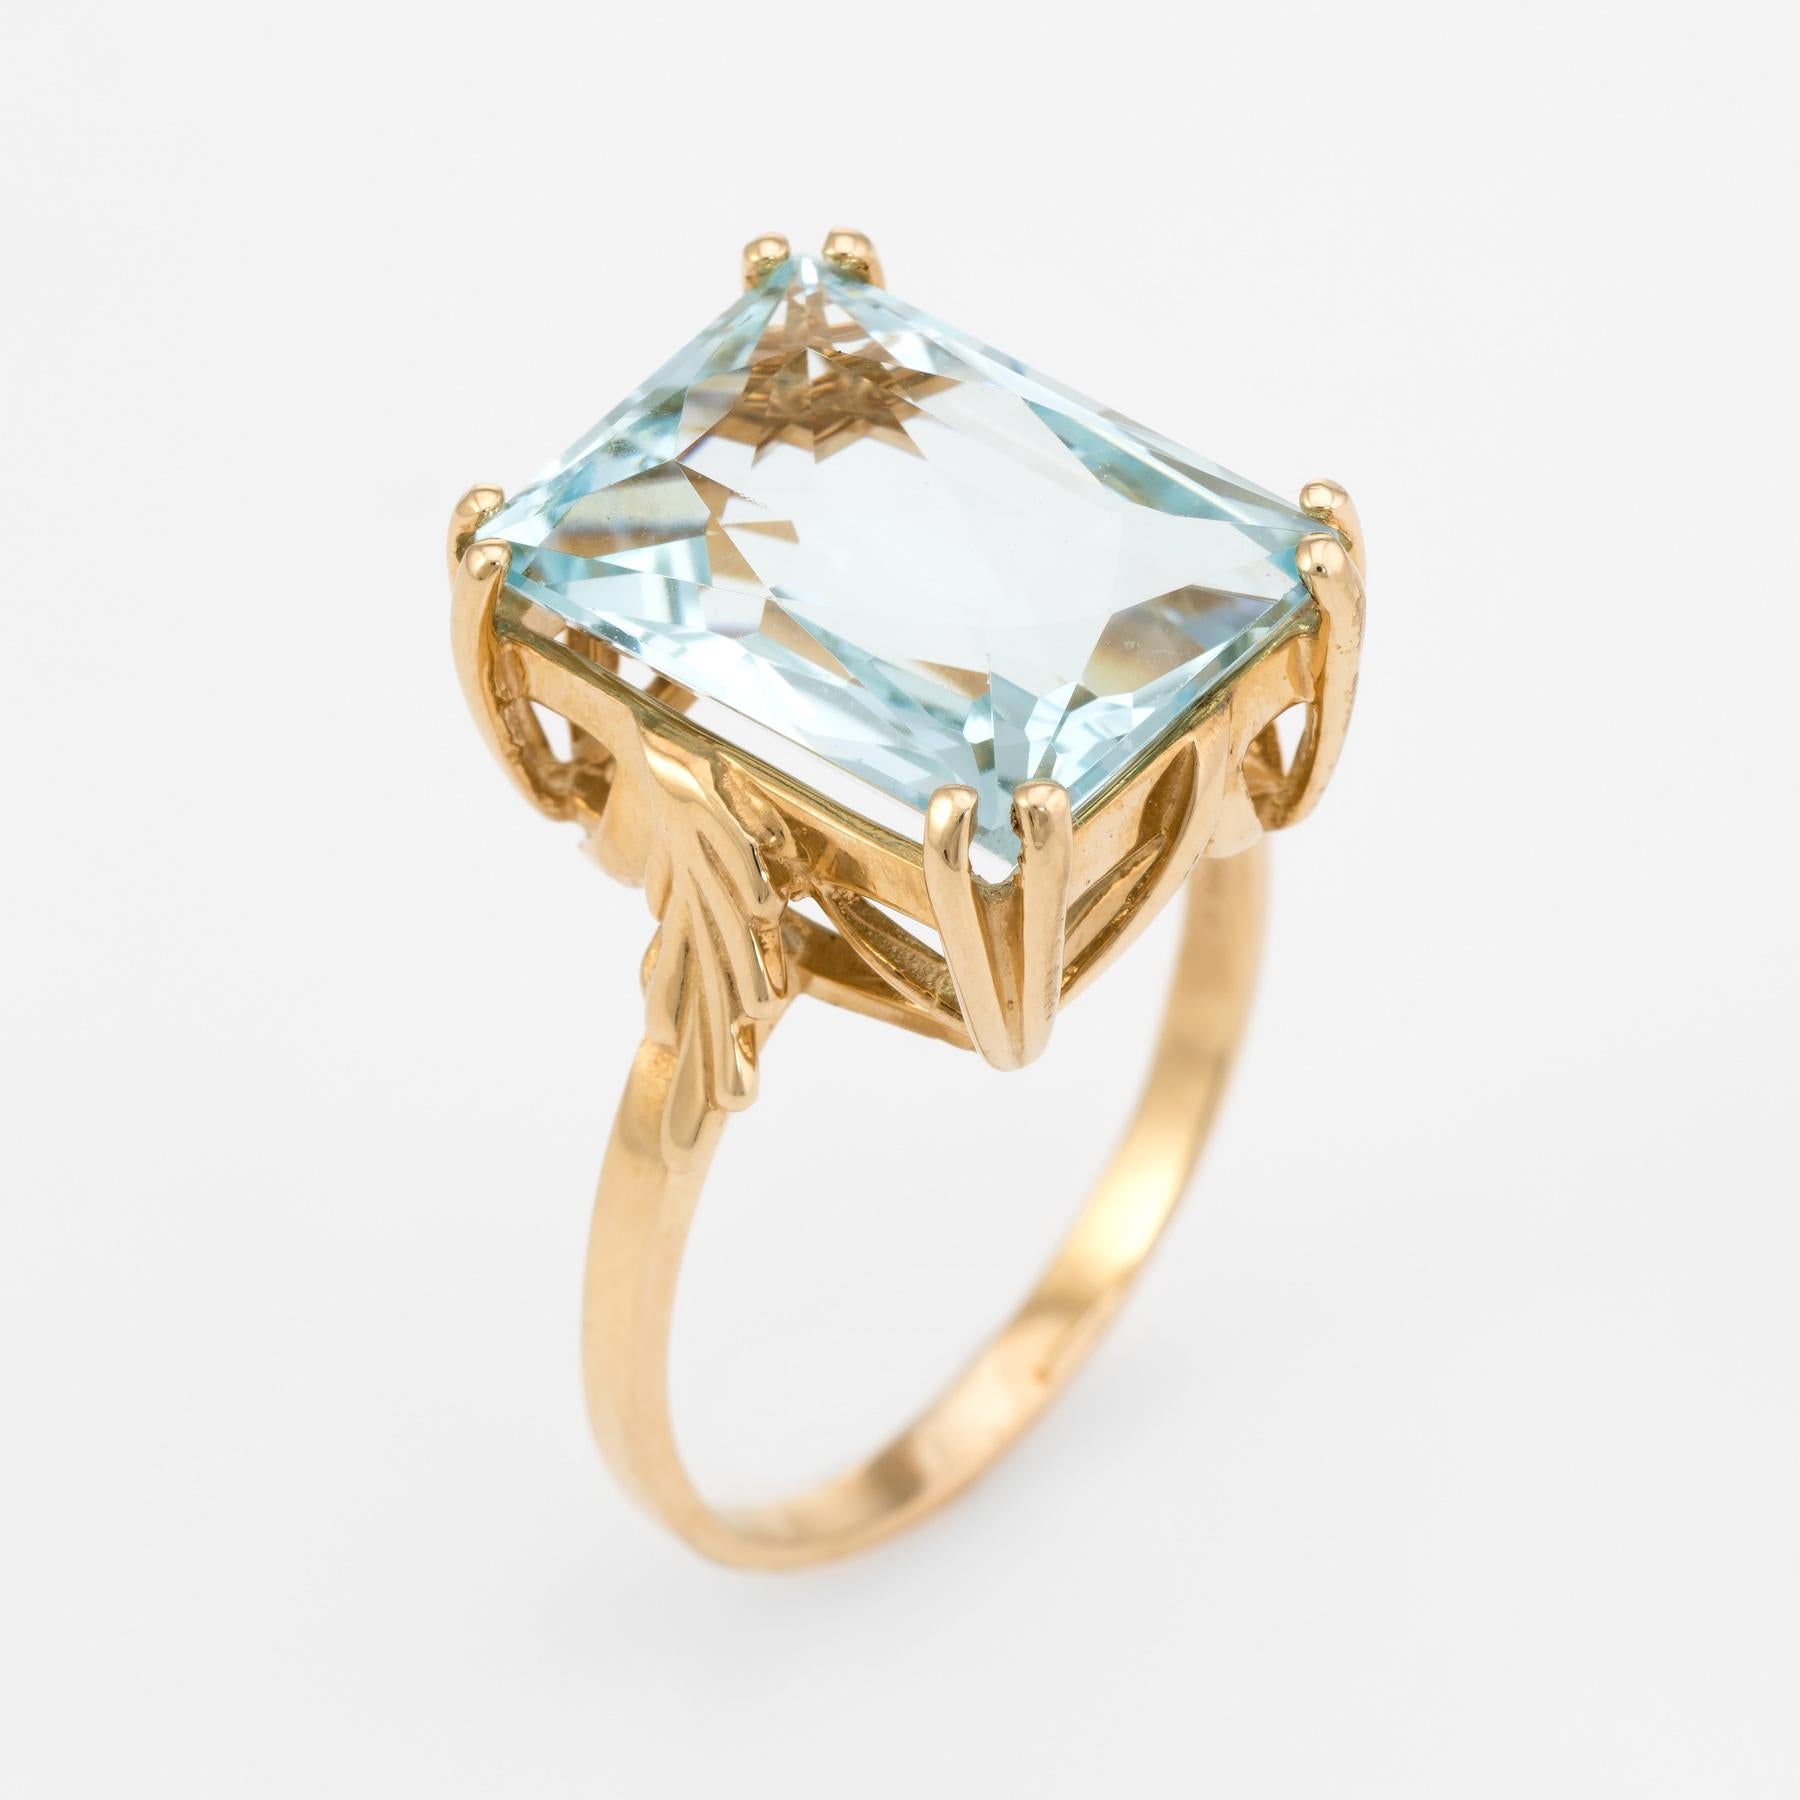 Elegant large aquamarine cocktail ring, crafted in 14 karat yellow gold. 

Faceted emerald cut aquamarine measures 16mm x 12mm (estimated at 13 carats). The aquamarine is in excellent condition and free of cracks or chips.   

The ring is in